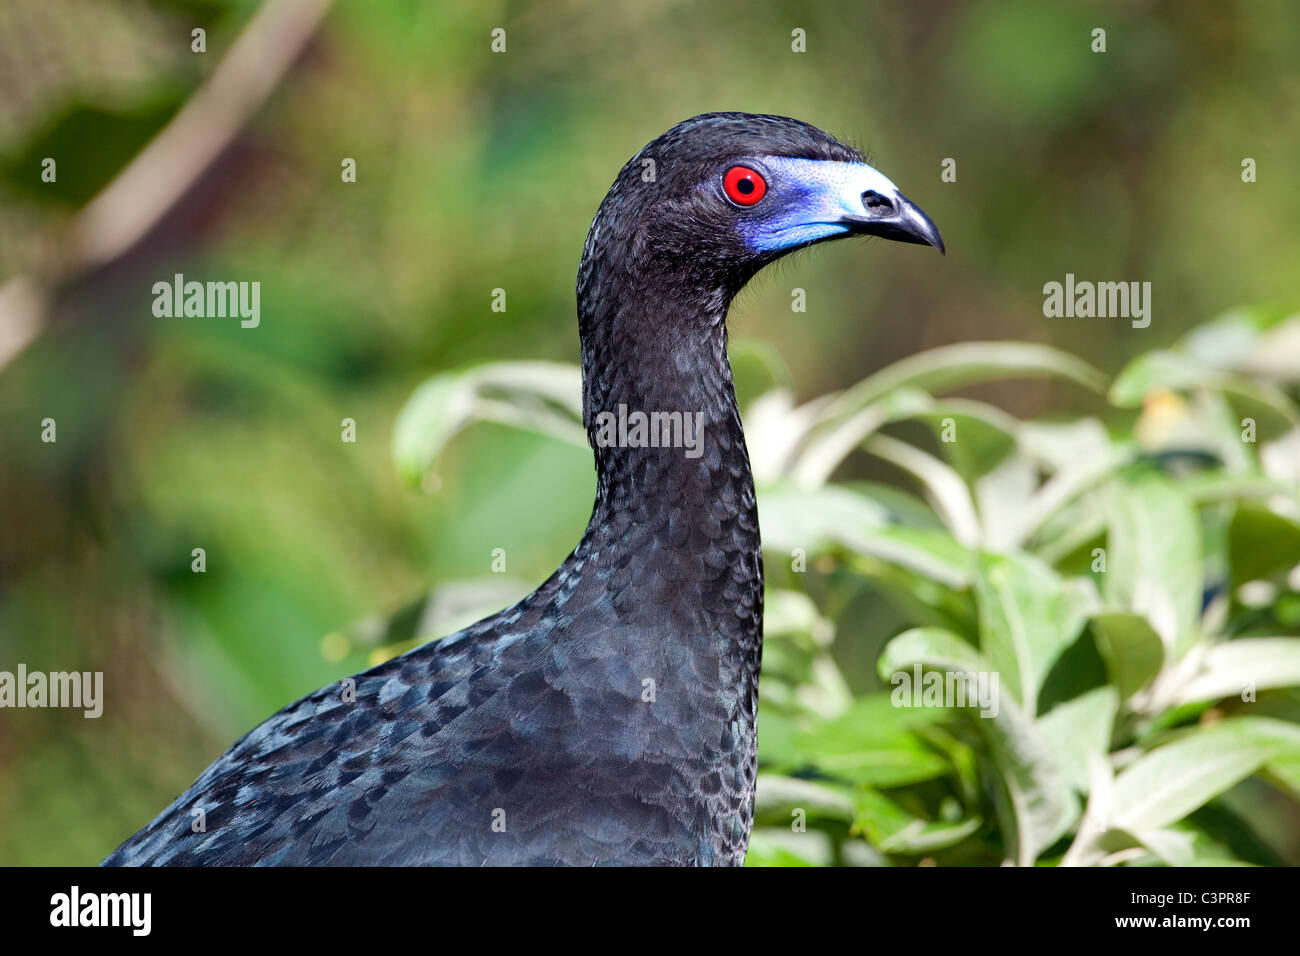 A black guan (Chamaepetes unicolor) bird in Costa Rica. Stock Photo